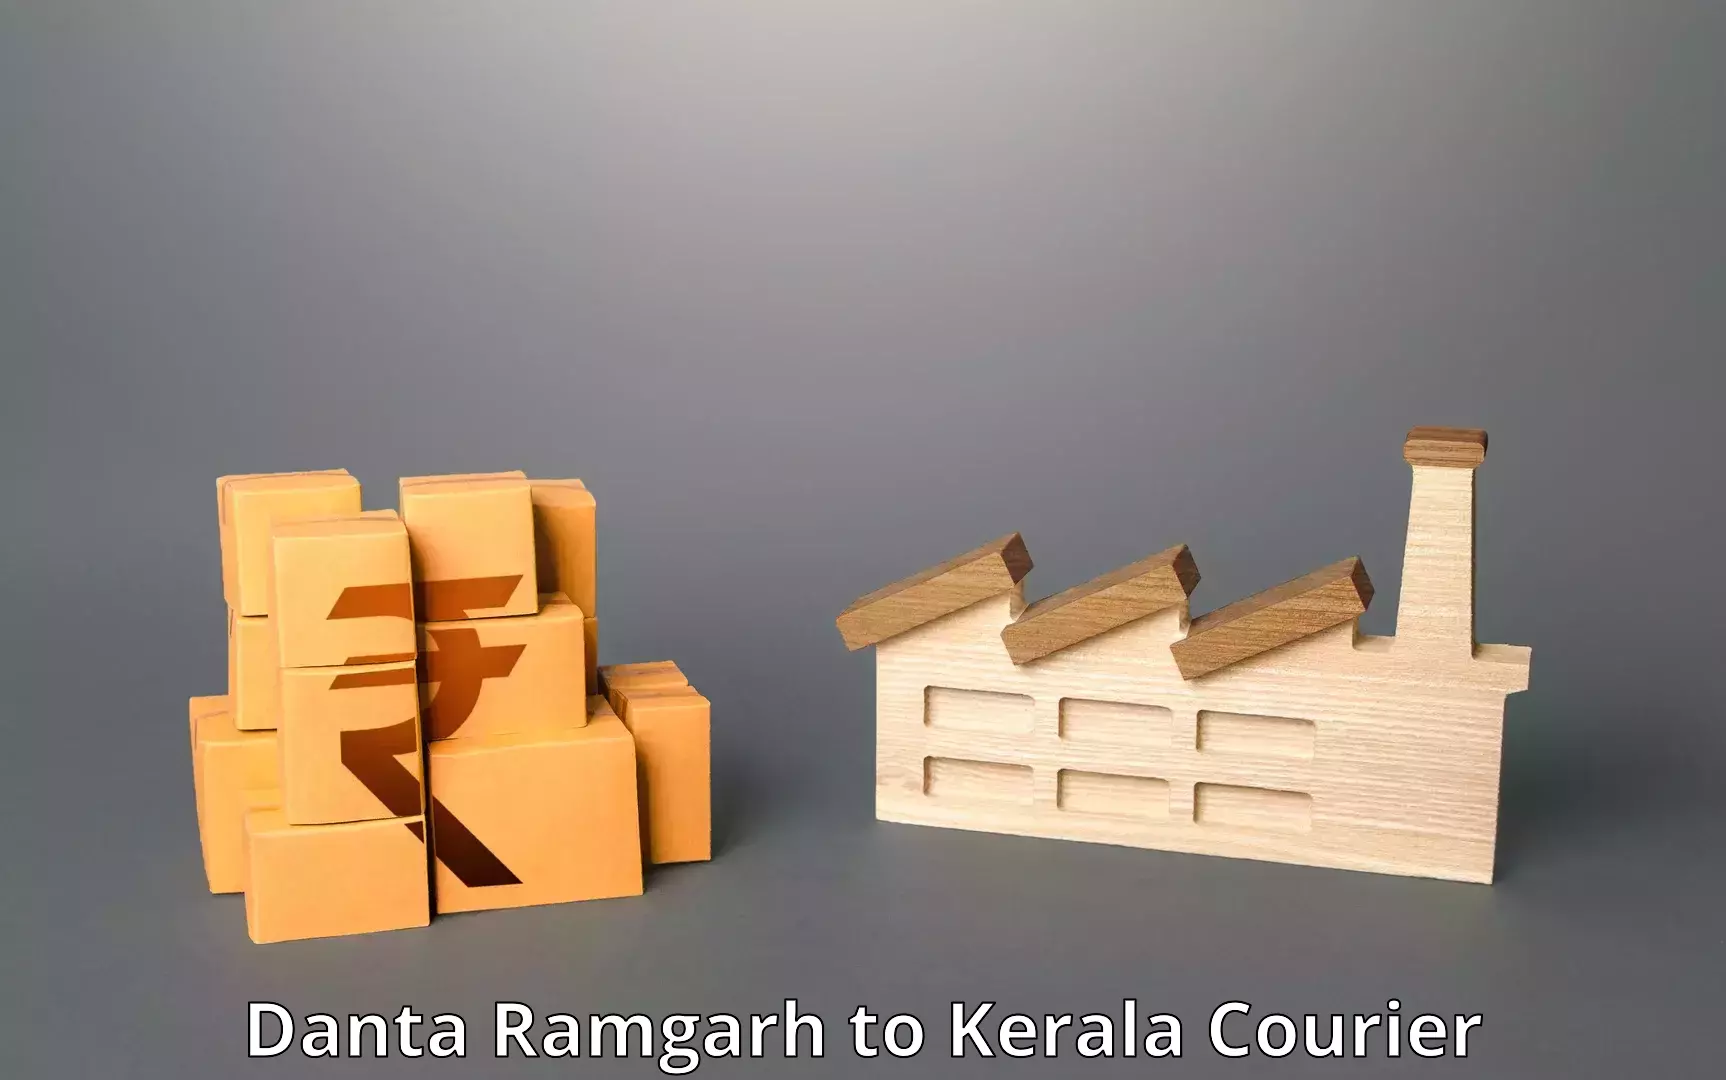 Premium courier services Danta Ramgarh to Cochin University of Science and Technology